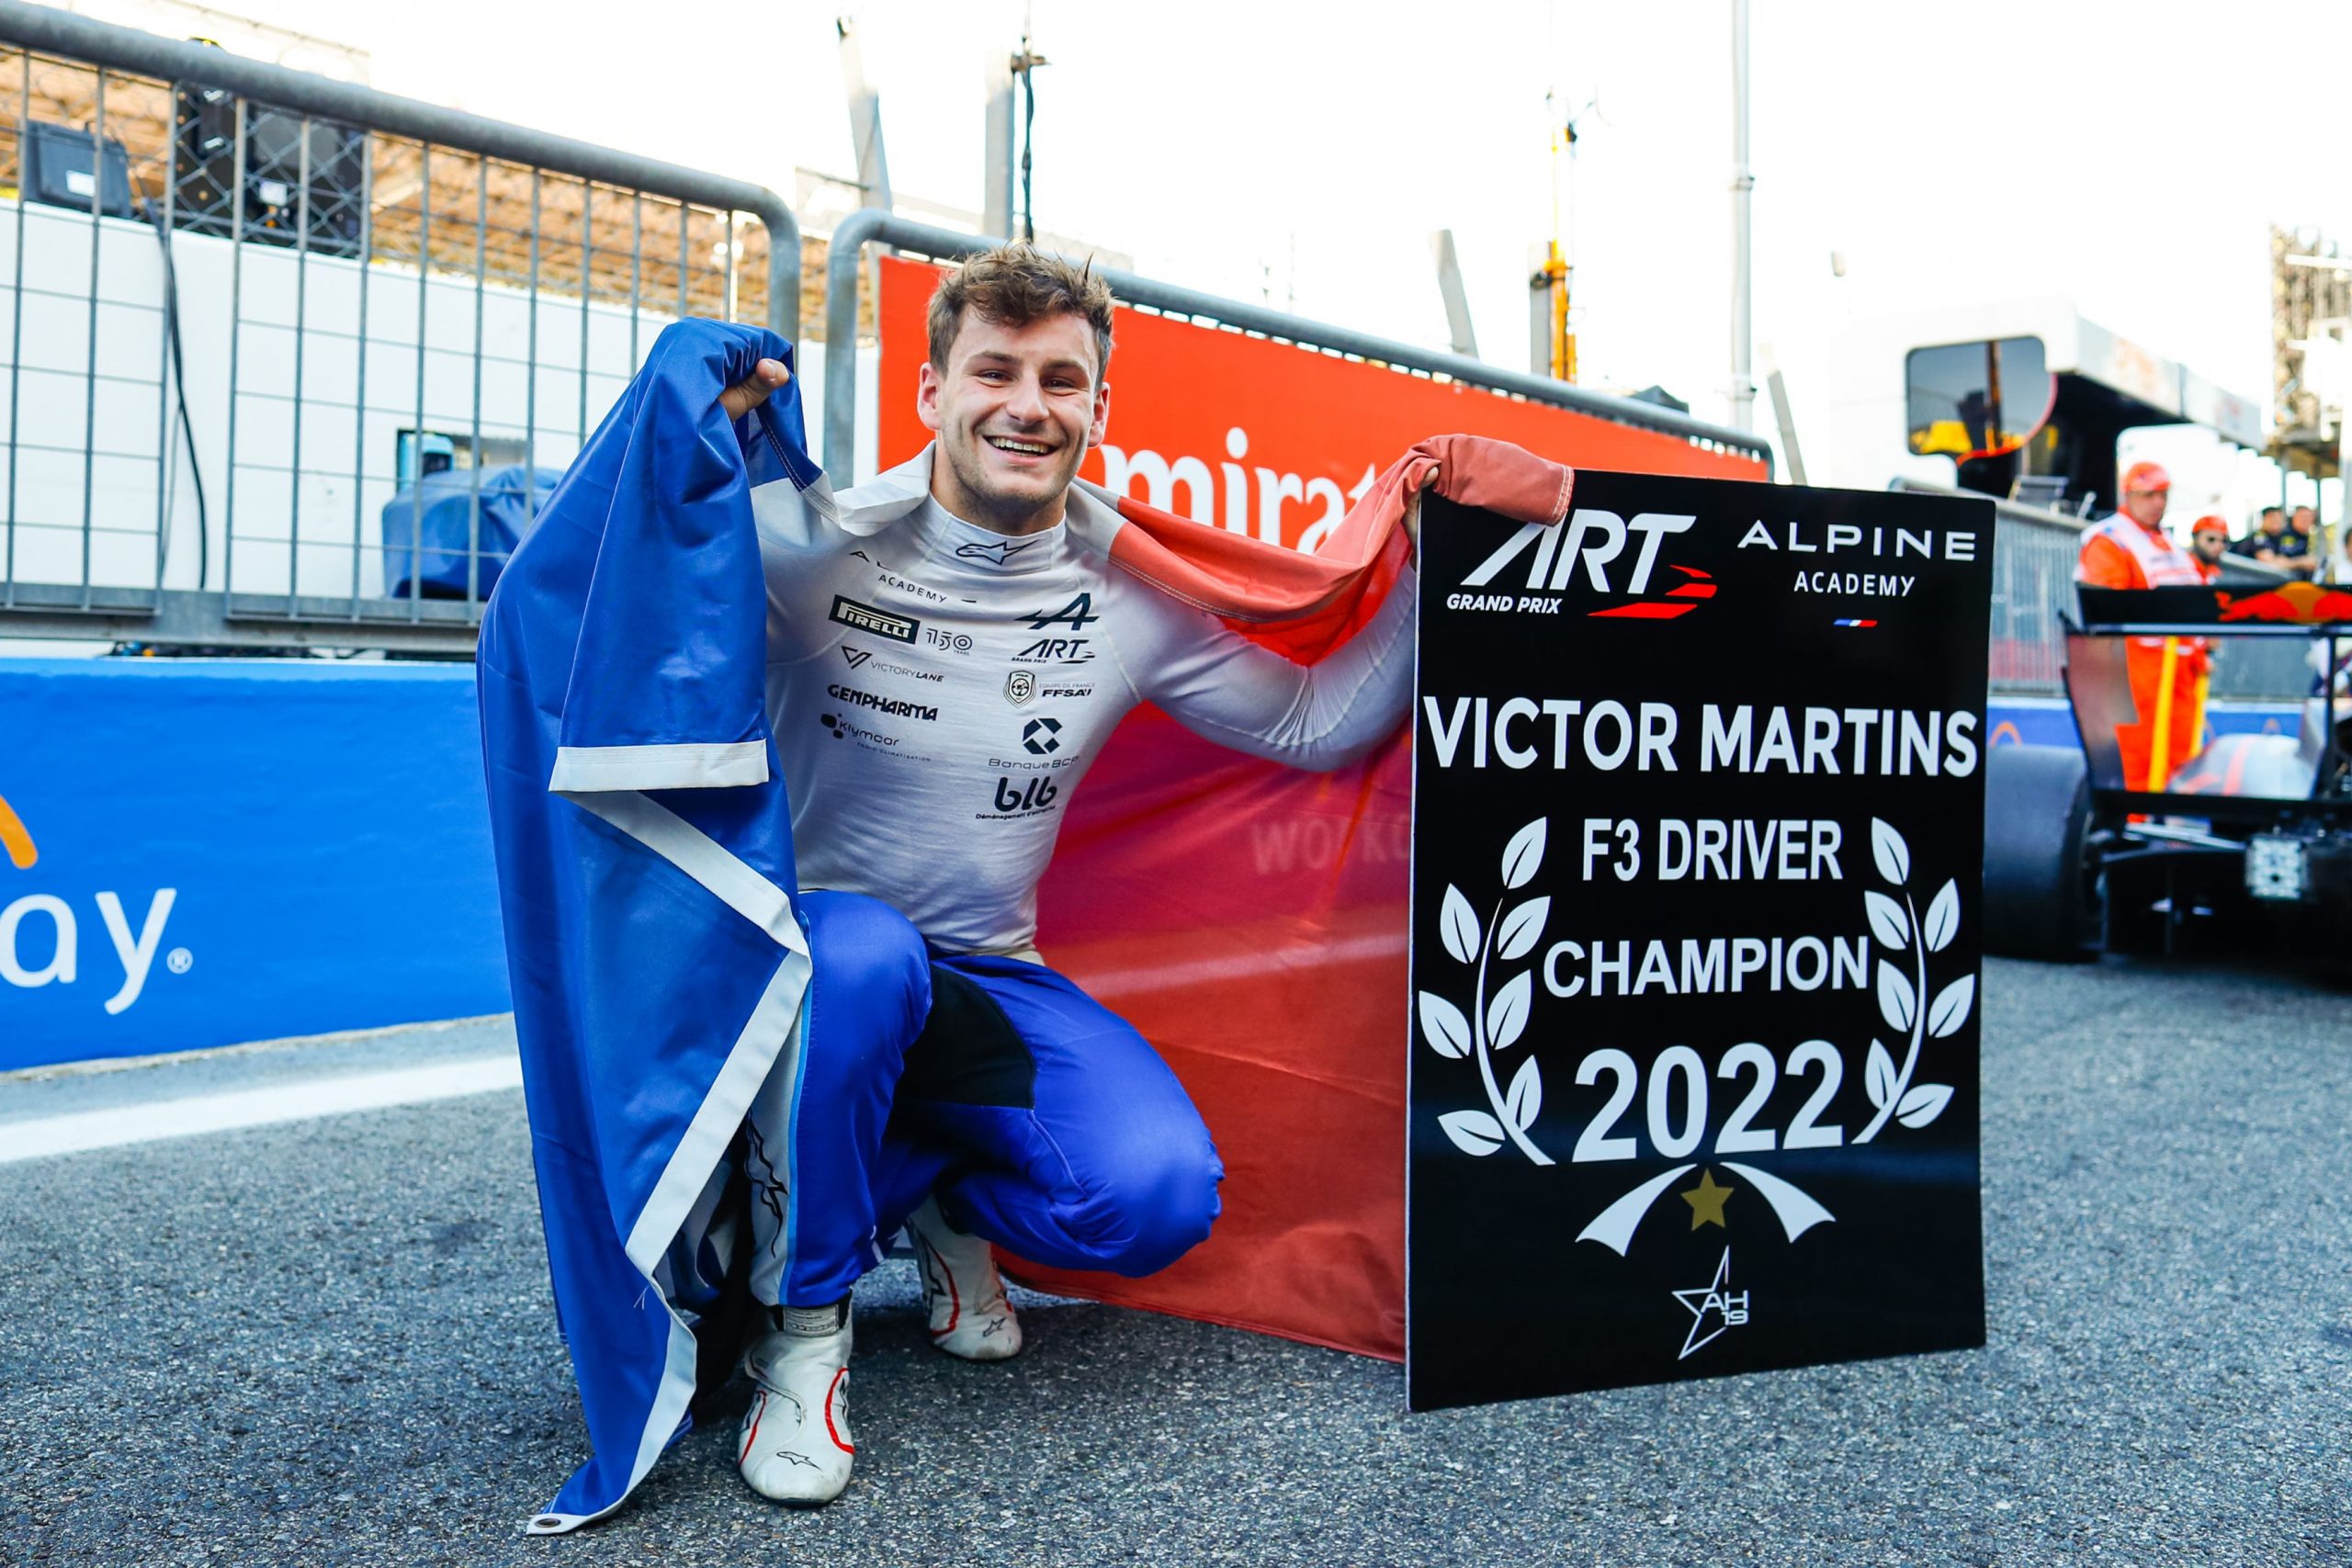 Victor Martins is the 2022 F3 Champ...